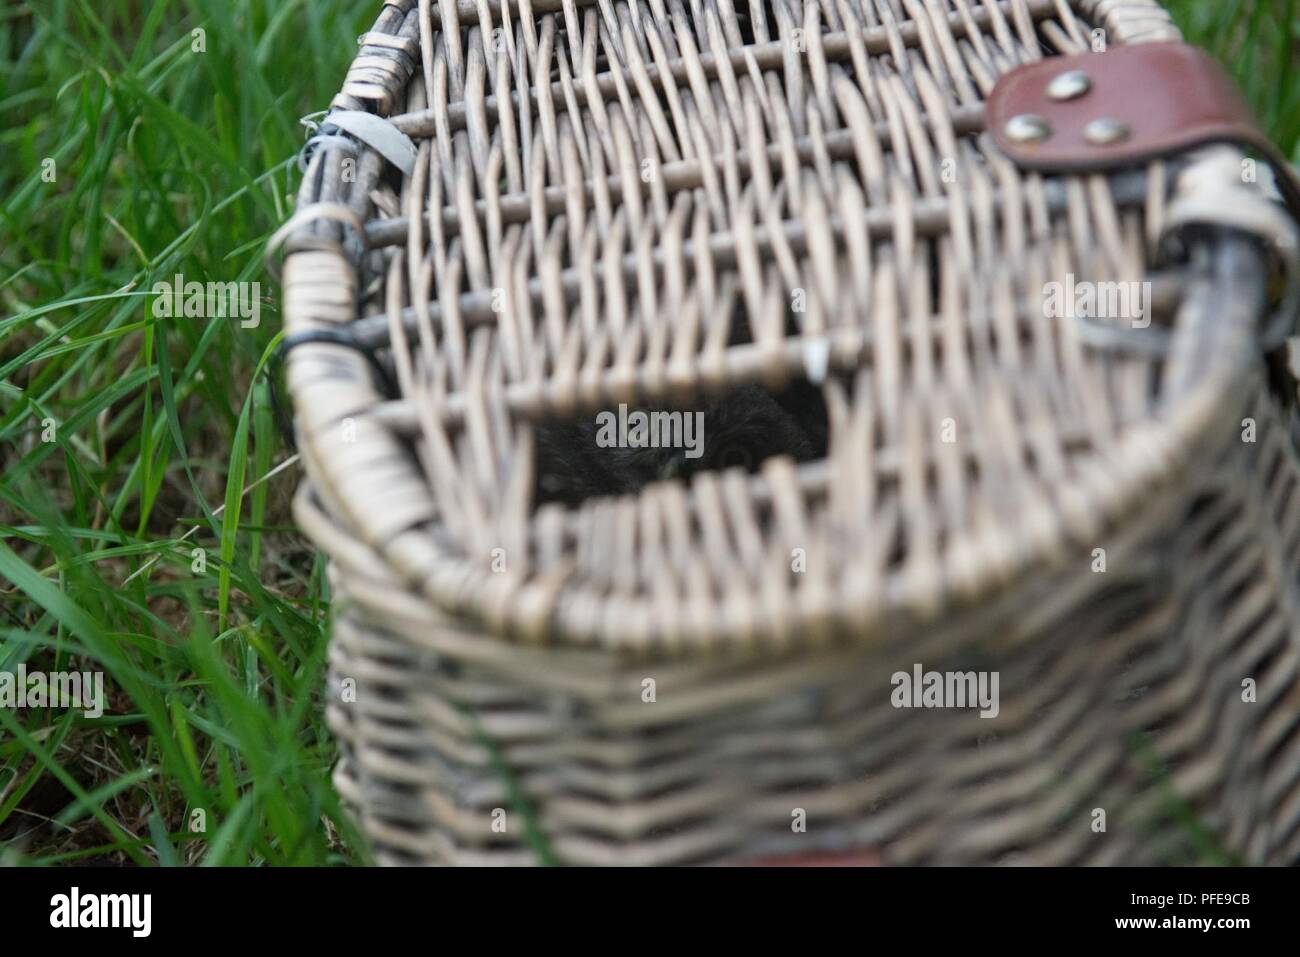 A little owl (Athene noctua), one of the protected species of birds nesting on Chièvres Air Base, stares at the camera from the hole of a basket, in Chièvres, Belgium, June 8, 2018. Stock Photo